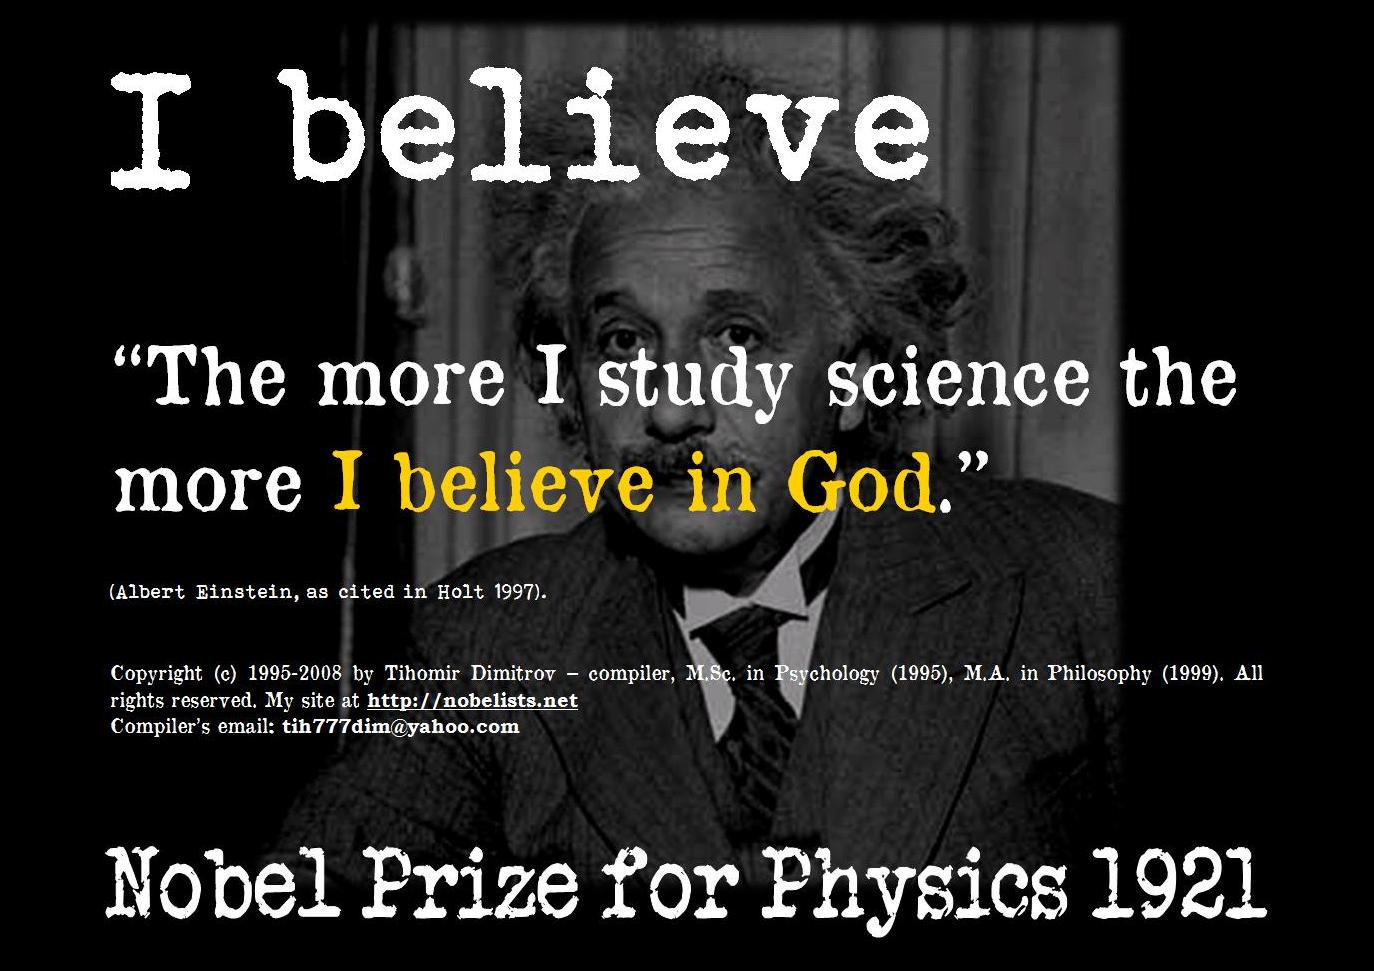 anti atheists meme - I believe The more I study science the more I believe in God.' Albert Einstein, as cited in Holt 1997. Copyright c 19952008 by Tihomir Dimitrov compiler, M.Sc. in Psychology 1995, M.A. in Philosophy 1999. All rights reserved. My site 